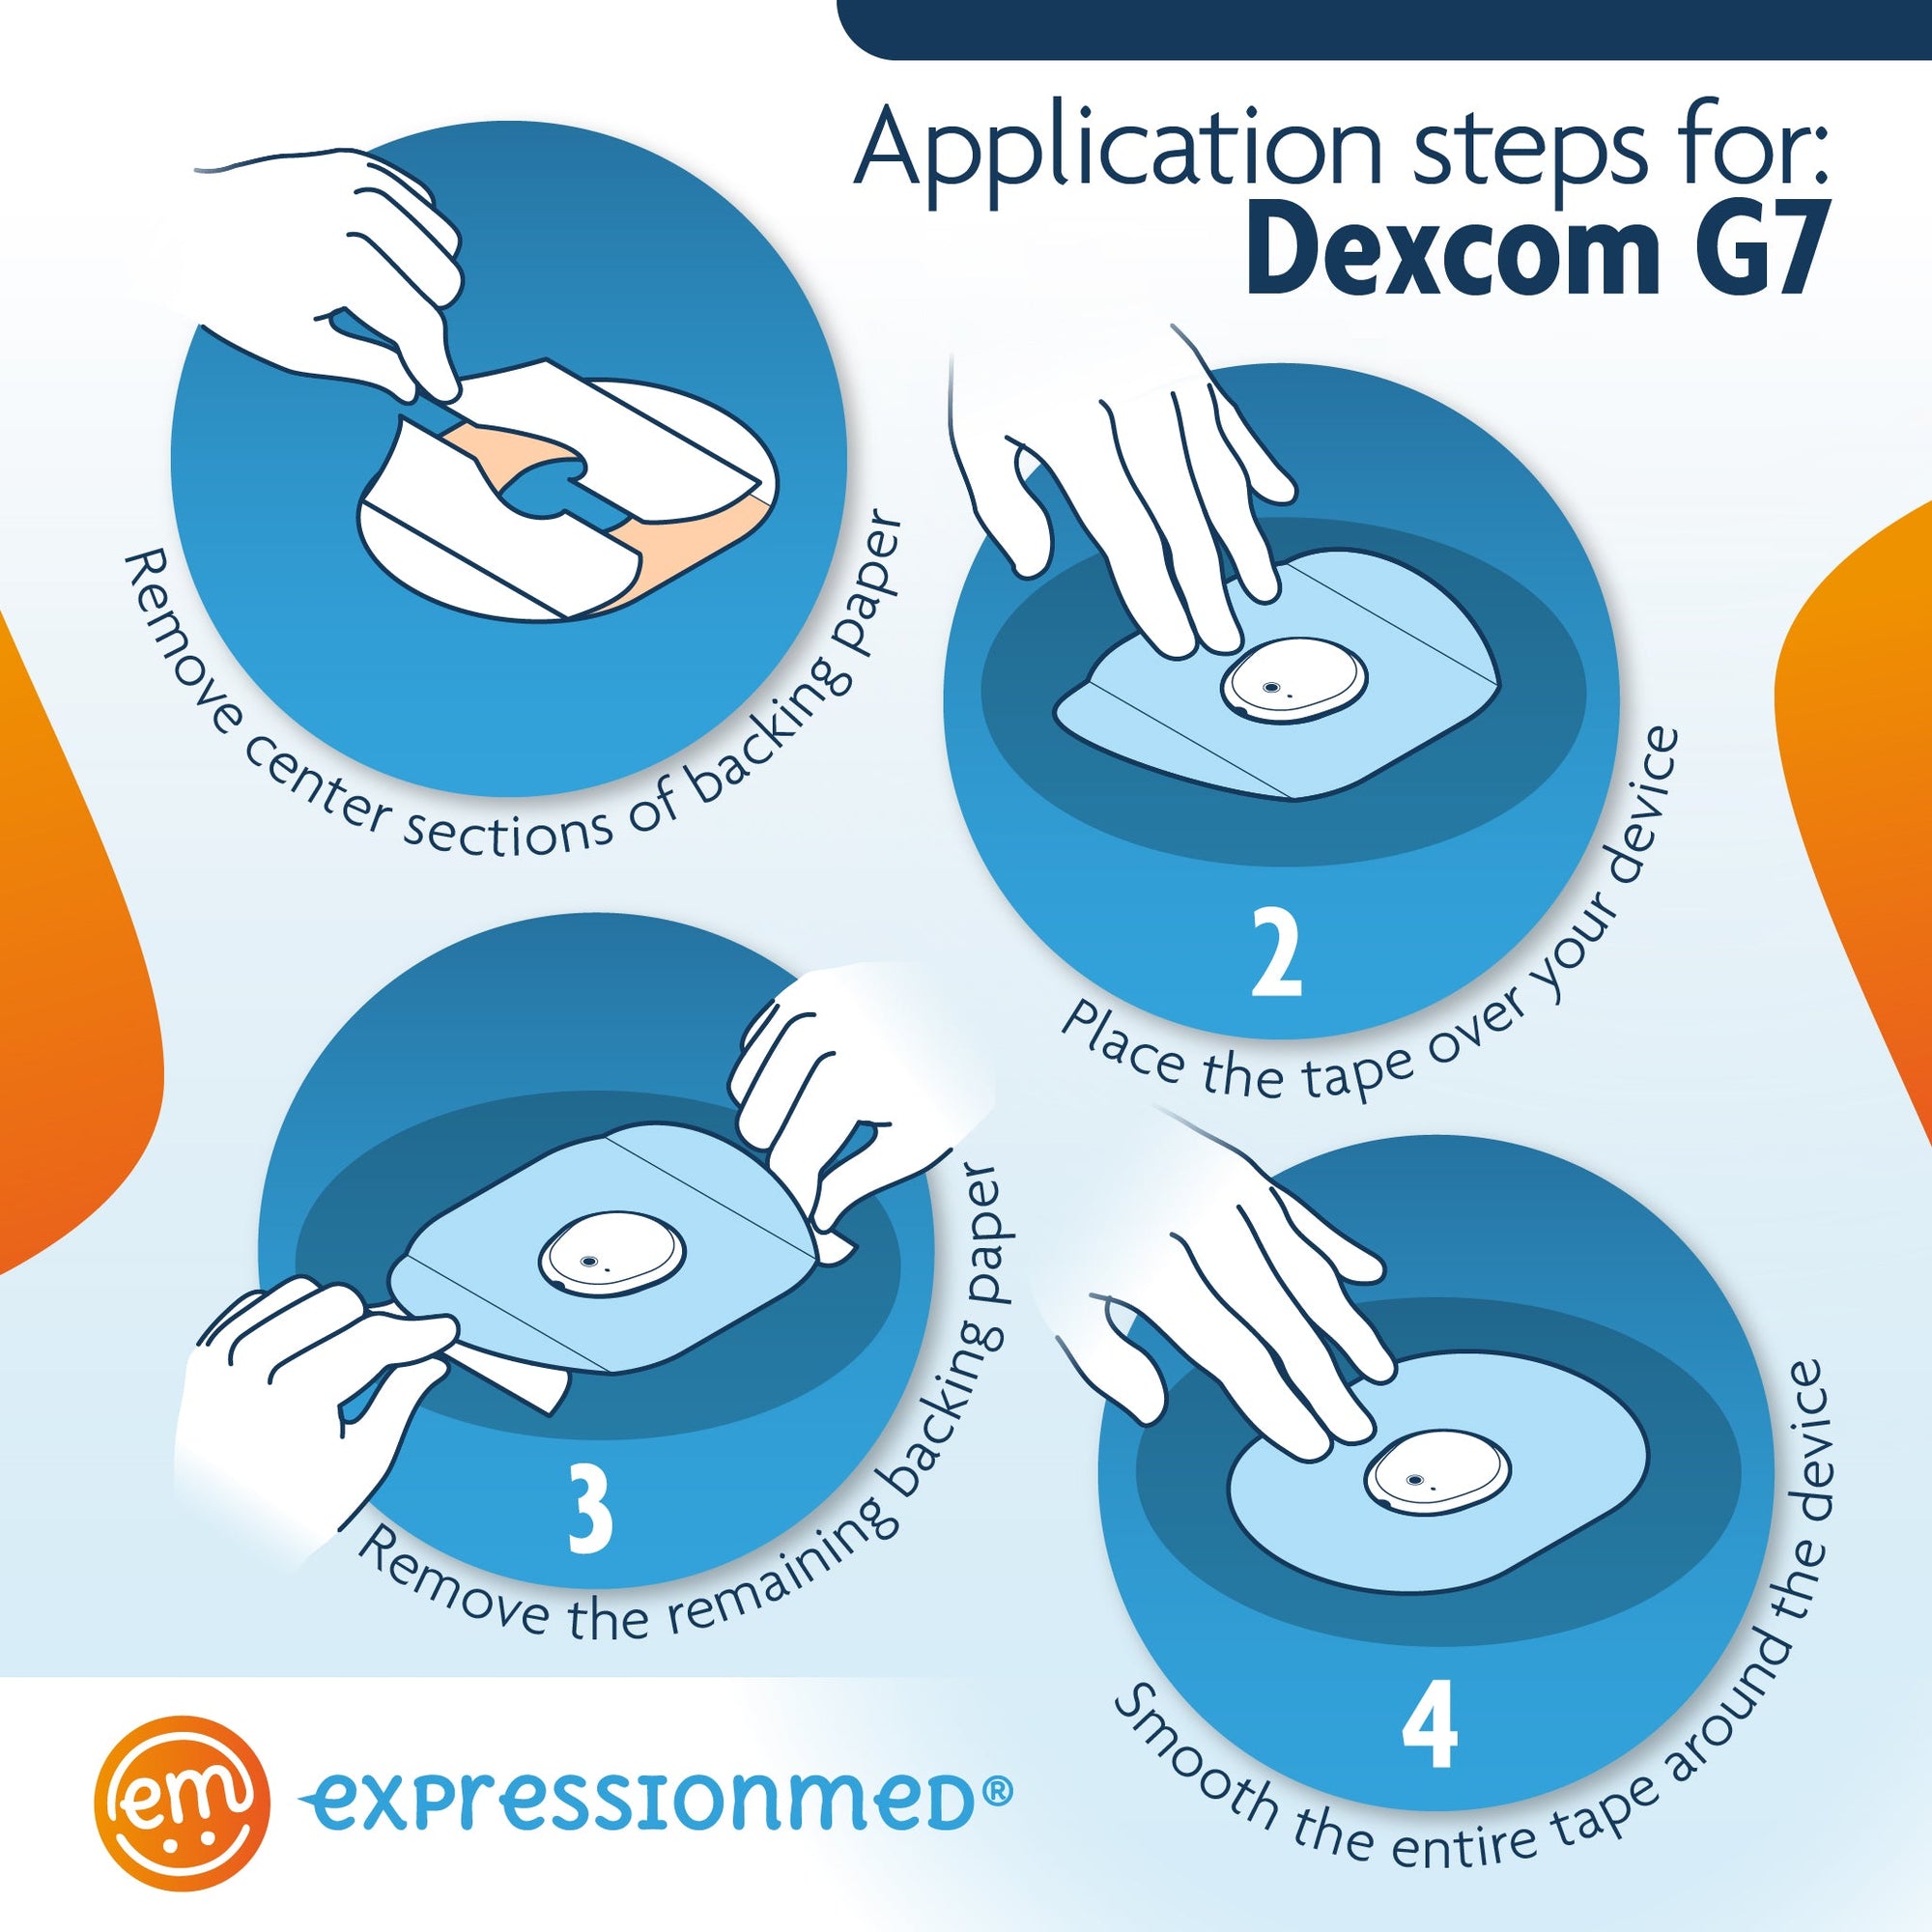 Application Instructions. 1. Prep skin with soap and water. 2. Remove paper Middle Sections and lay center hole over device. 3. Peel off both end sections and smooth down on skin. To remove, hold an edge and stretch material off skin., Dexcom Stelo Glucose Biosensor System